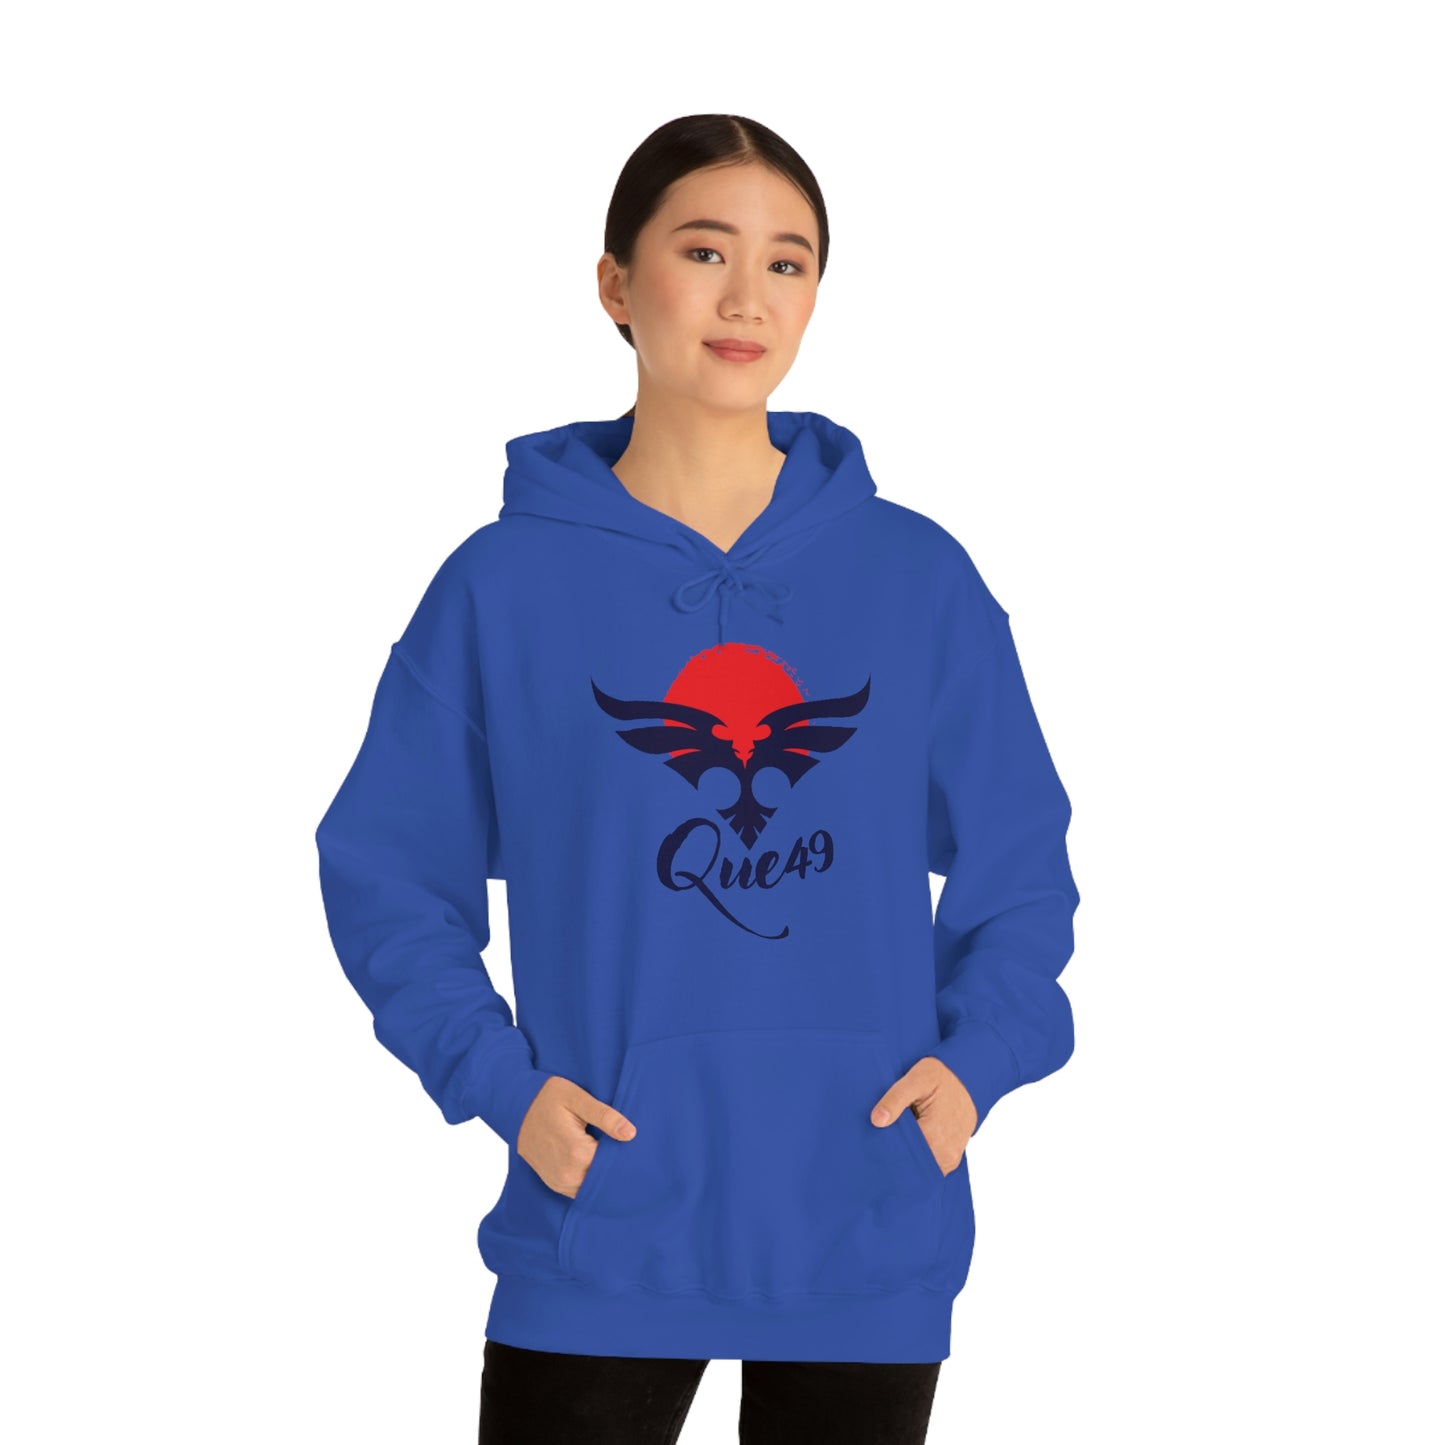 Embrace the finest things with the 'Que 49' Dynasty Unisex Heavy Blend™ Hooded Sweatshirt